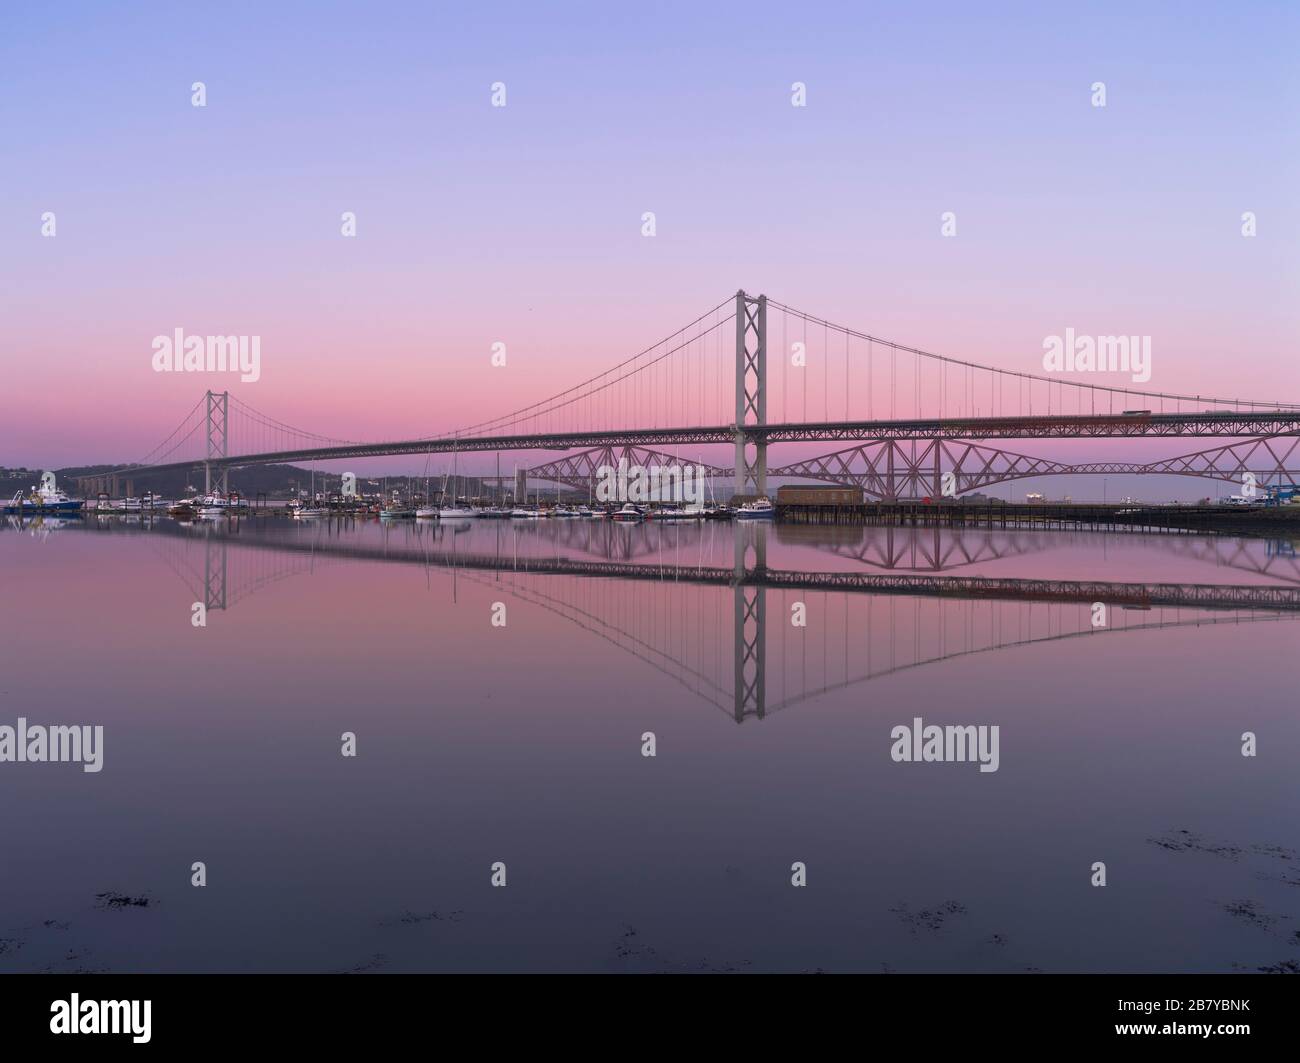 dh Scottish two bridges RIVER FORTH FORTH BRIDGE Across river Forth Scotland Rail Road Bridges dusk Stock Photo